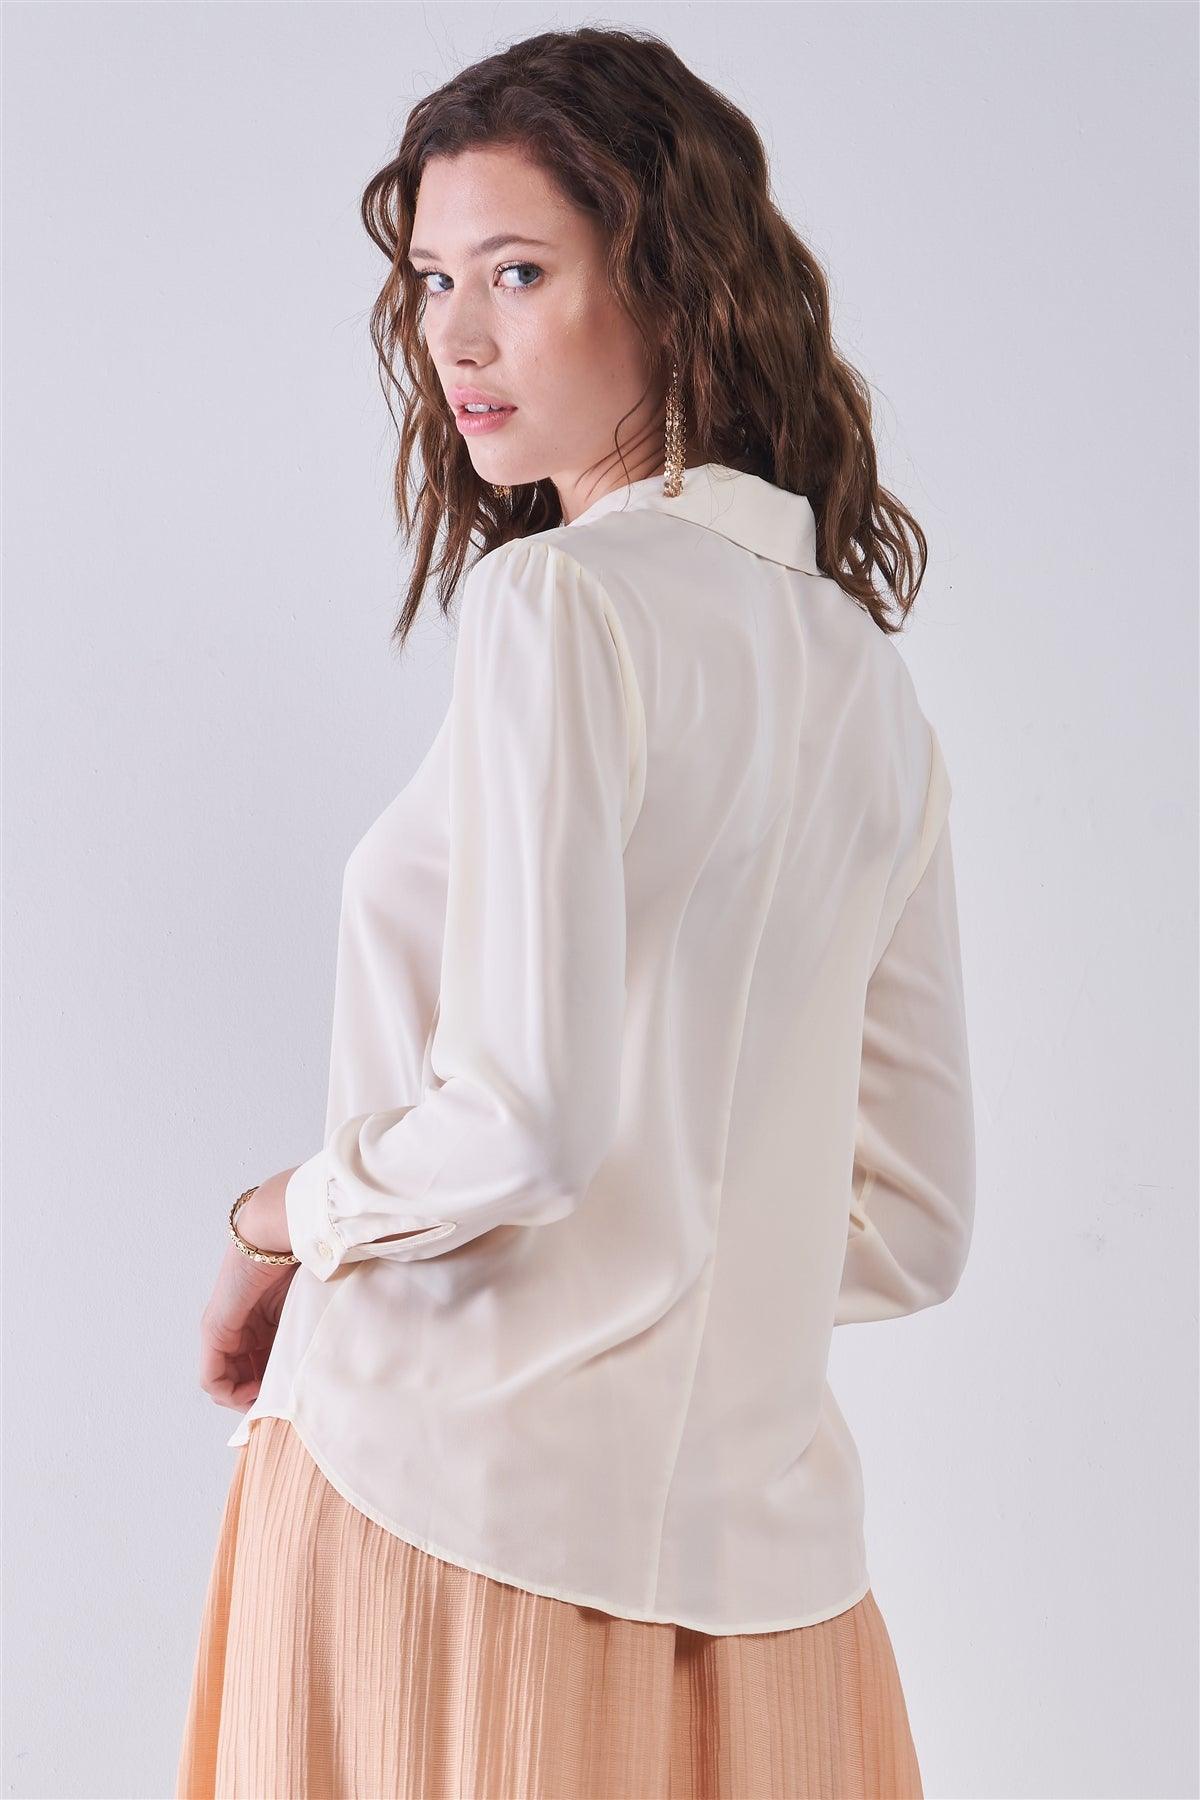 Shell Beige Long Sleeve Collared Neck Button-Down Front Blouse